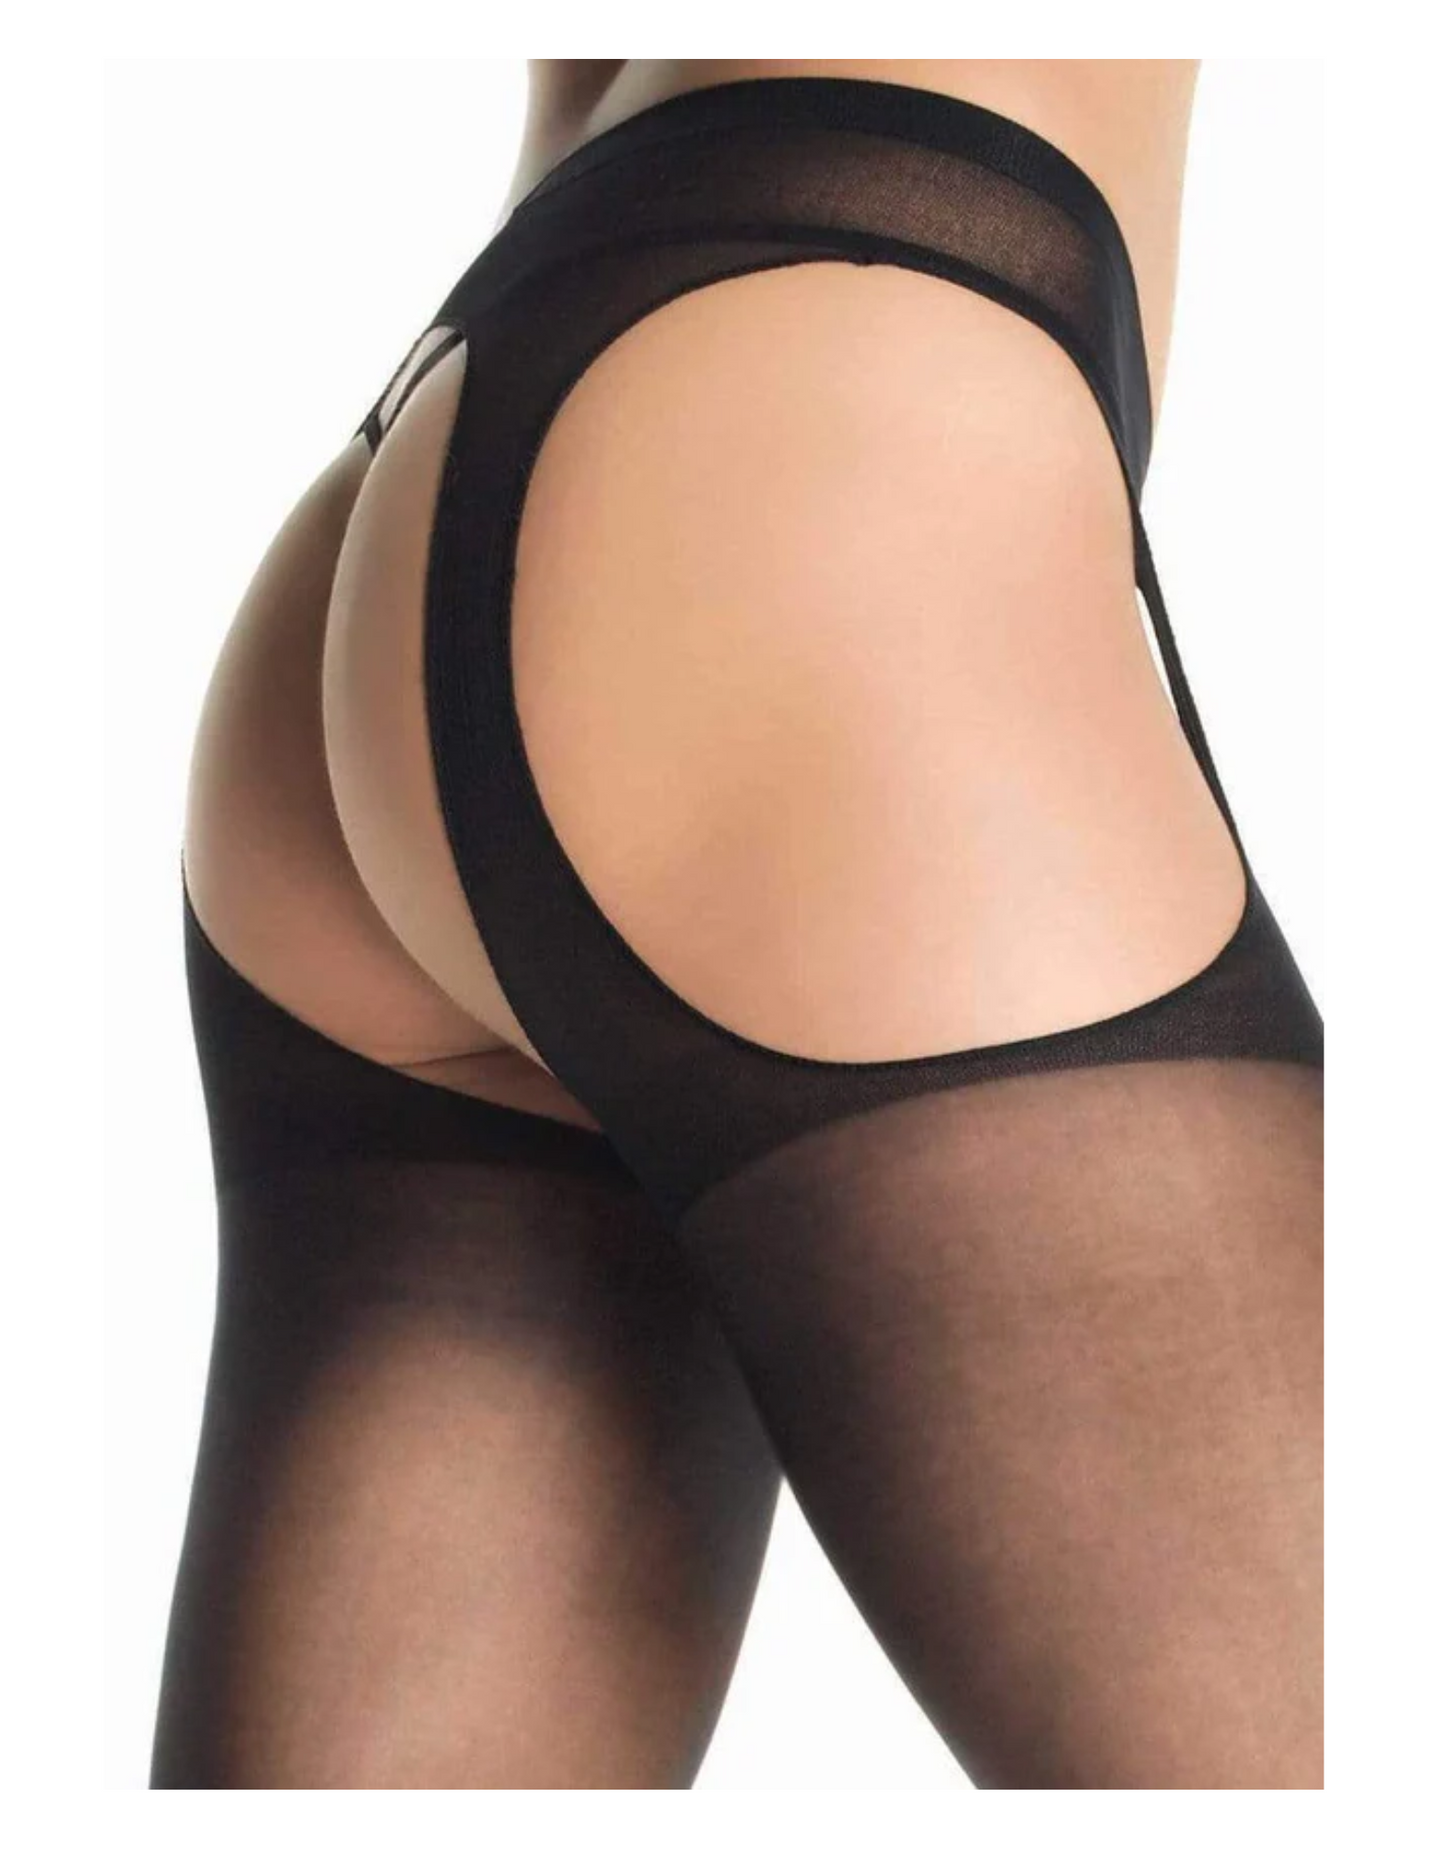 Close-up of the back side of the Sheer Suspender Pantyhose (black/OS) by Leg Avenue.